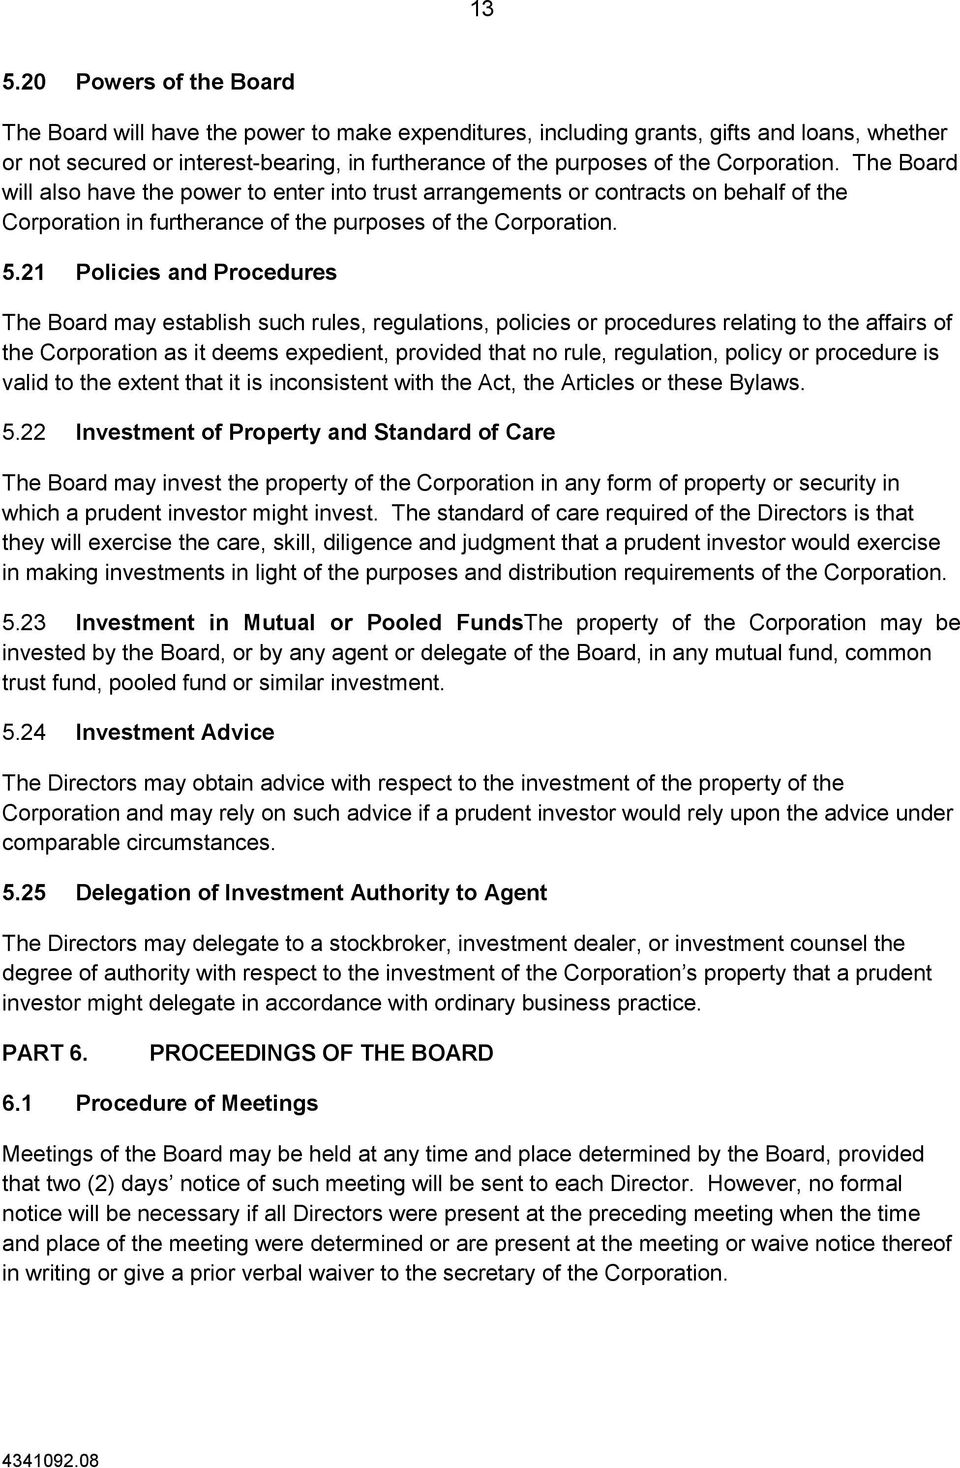 21 Policies and Procedures The Board may establish such rules, regulations, policies or procedures relating to the affairs of the Corporation as it deems expedient, provided that no rule, regulation,